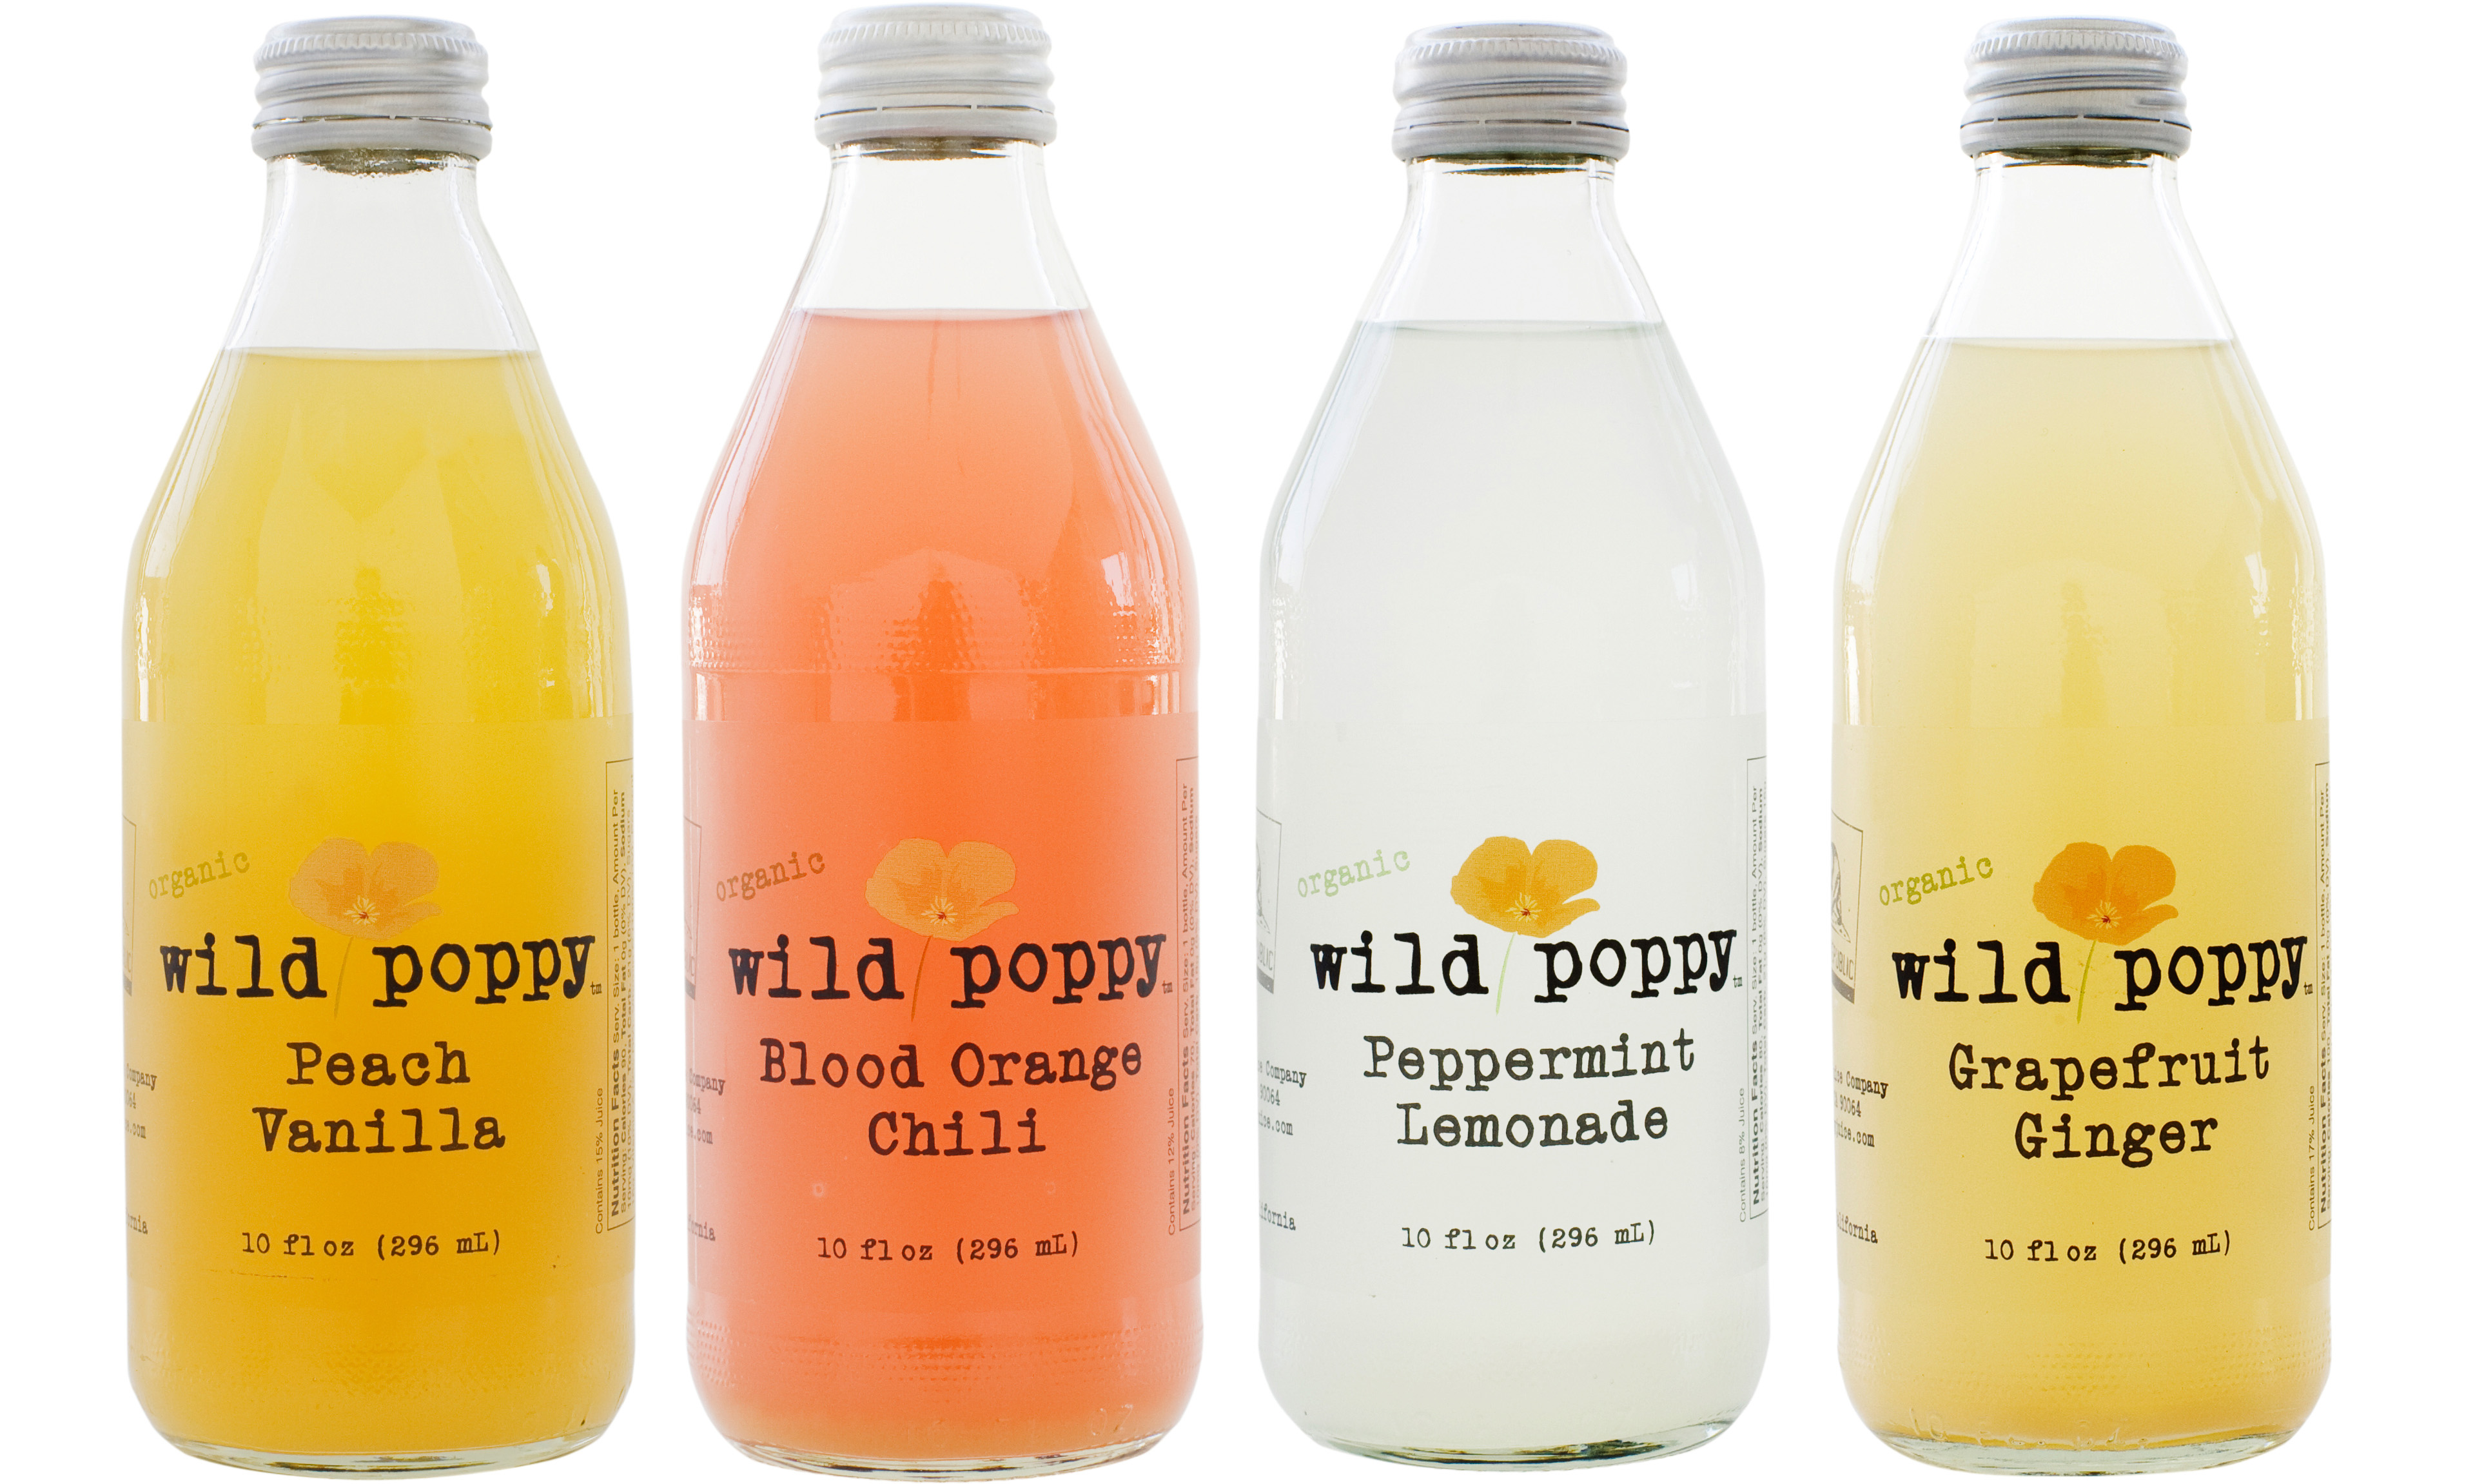 Wild Poppy Juice is certified organic and available in four flavors.